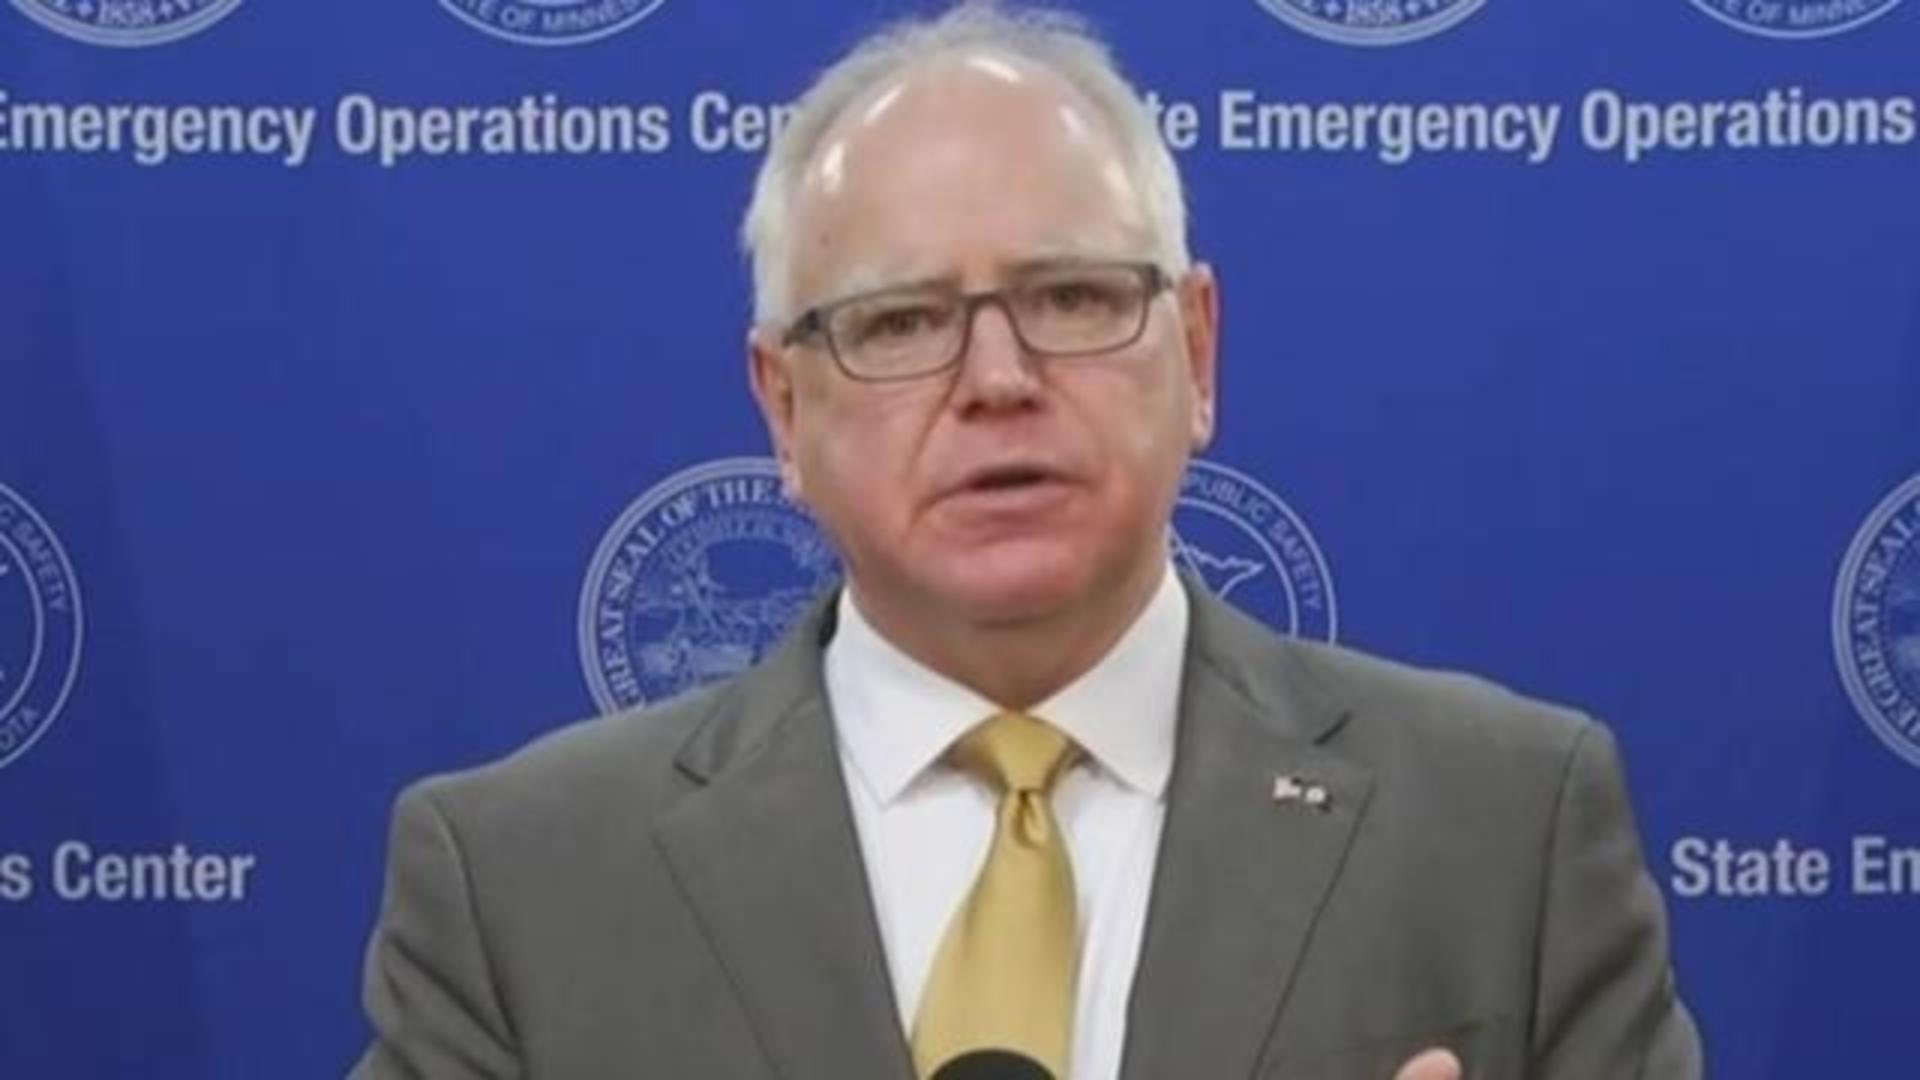 cbsn fusion minnesota governor tim walz press conference loosening covid restrictions thumbnail 621385